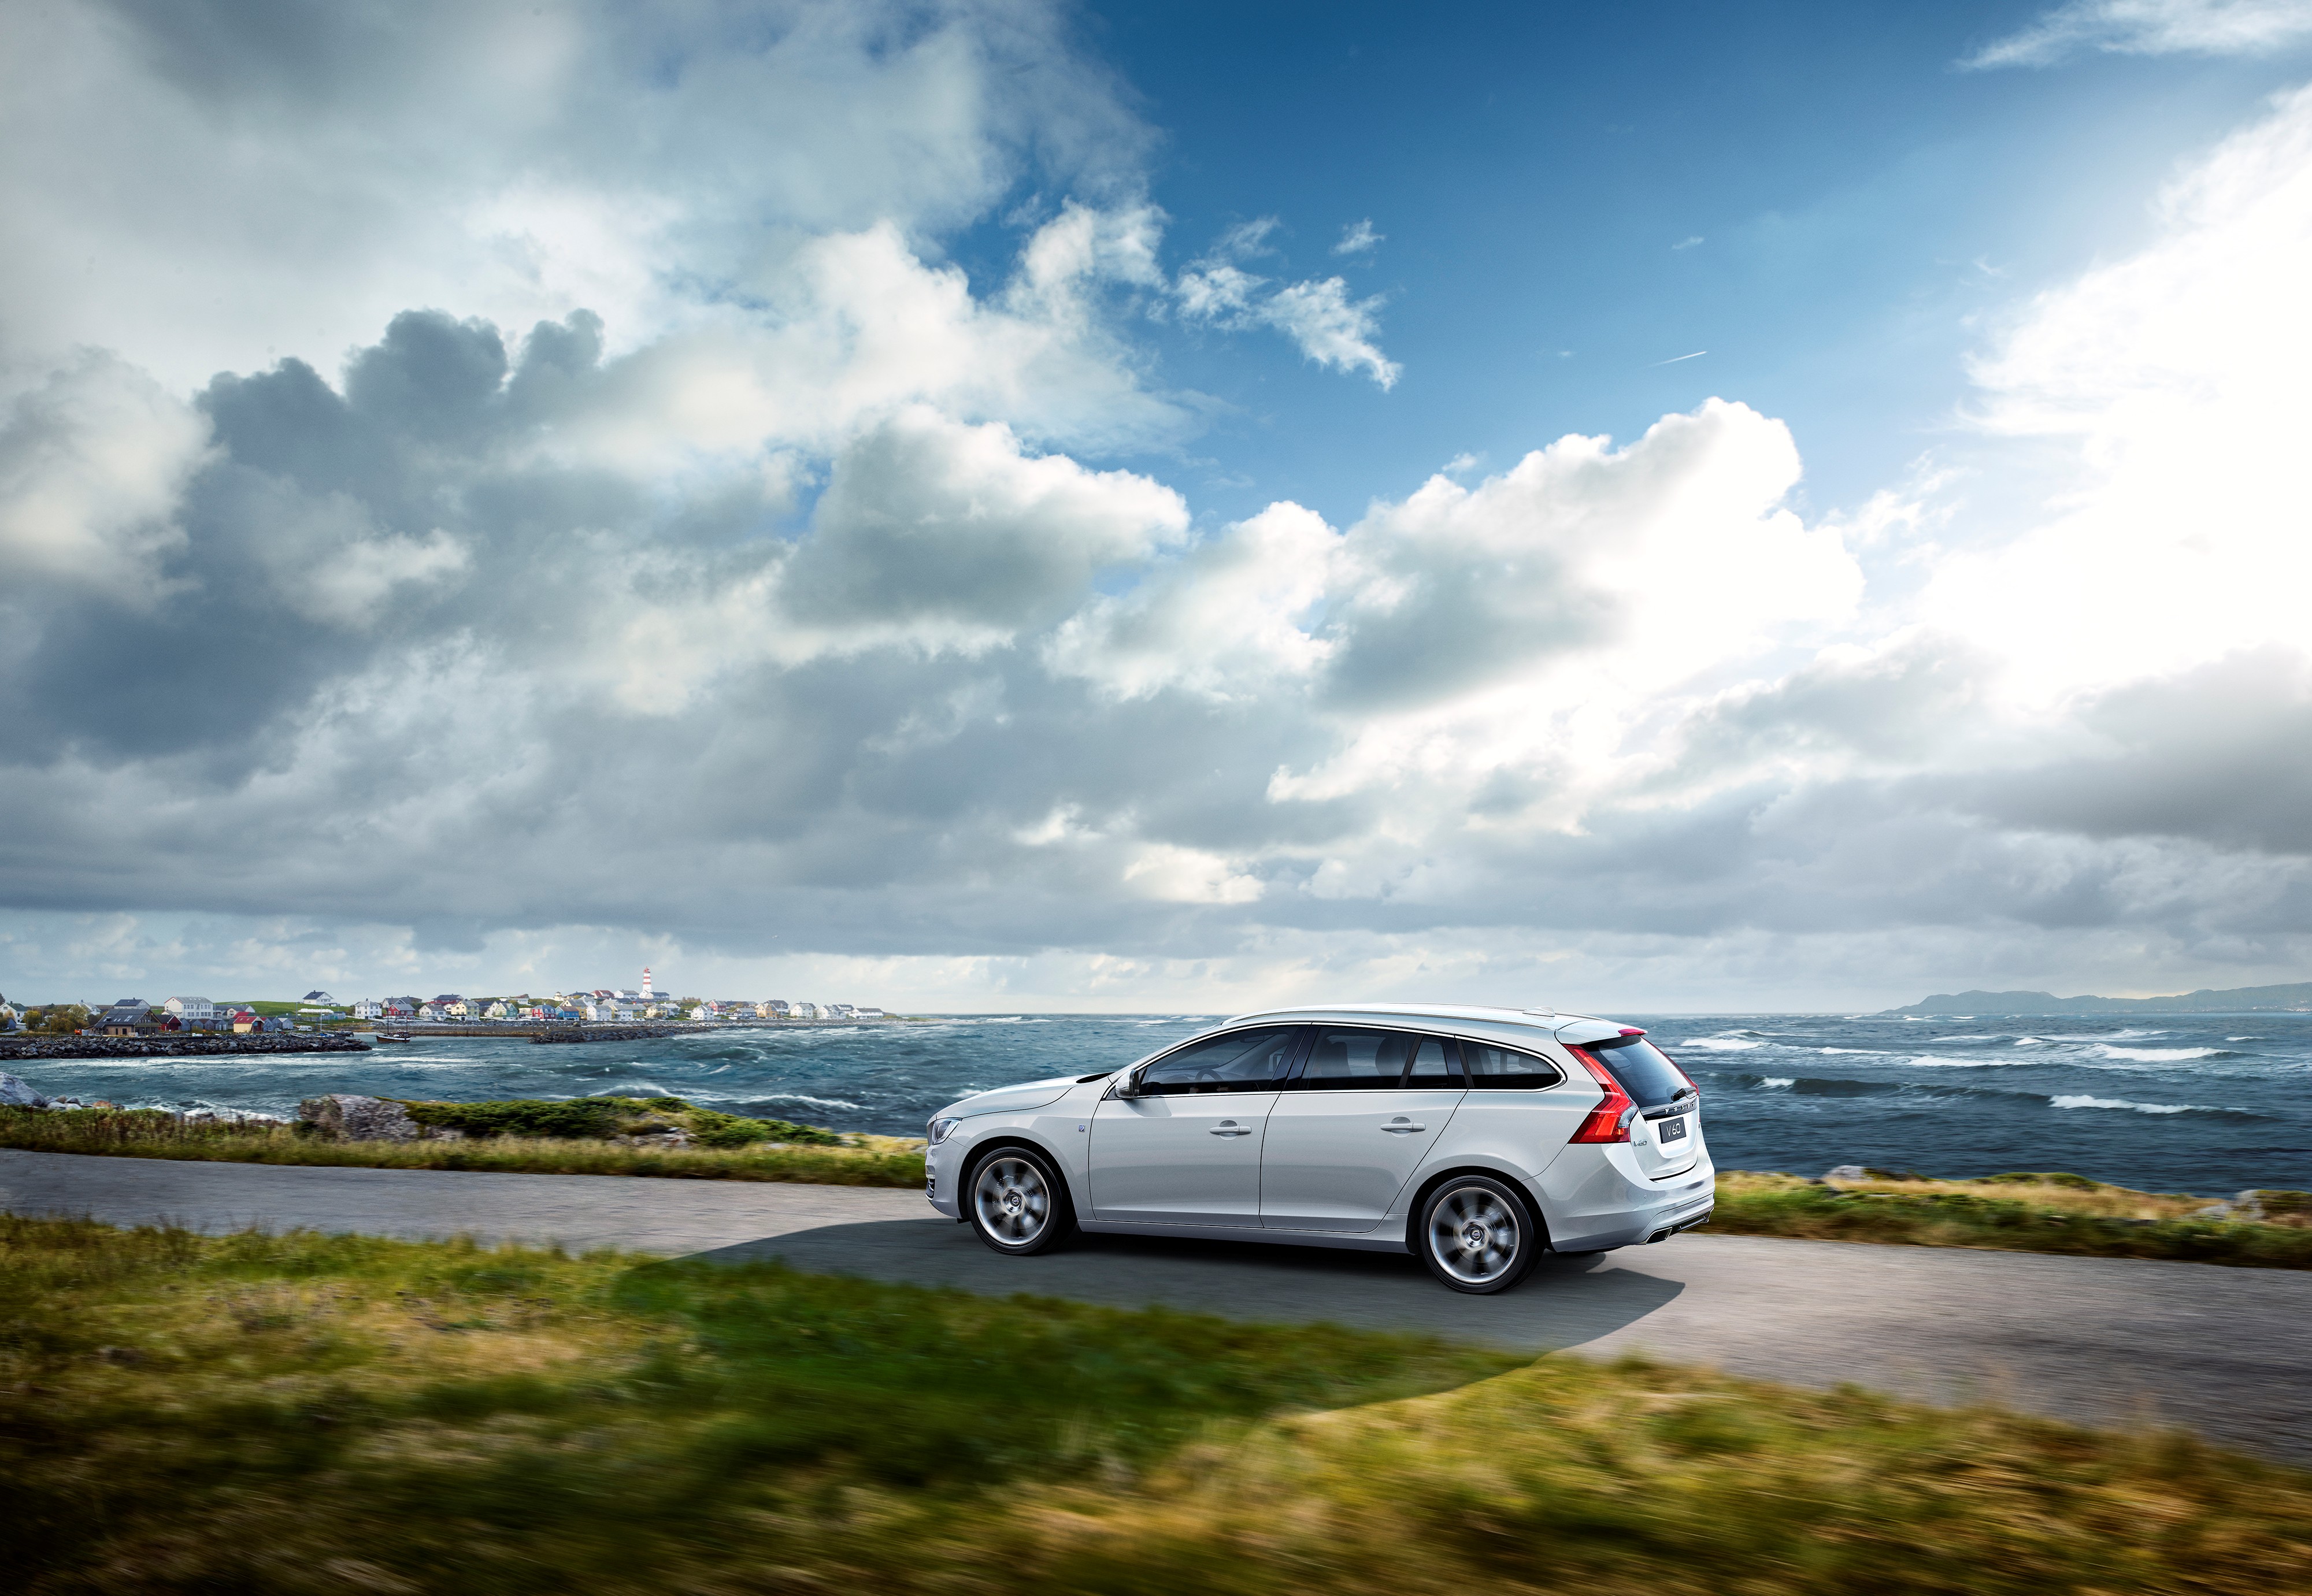 Volvo Roadside Assistance Program available at Culver City Volvo Cars in the Los Angeles area.